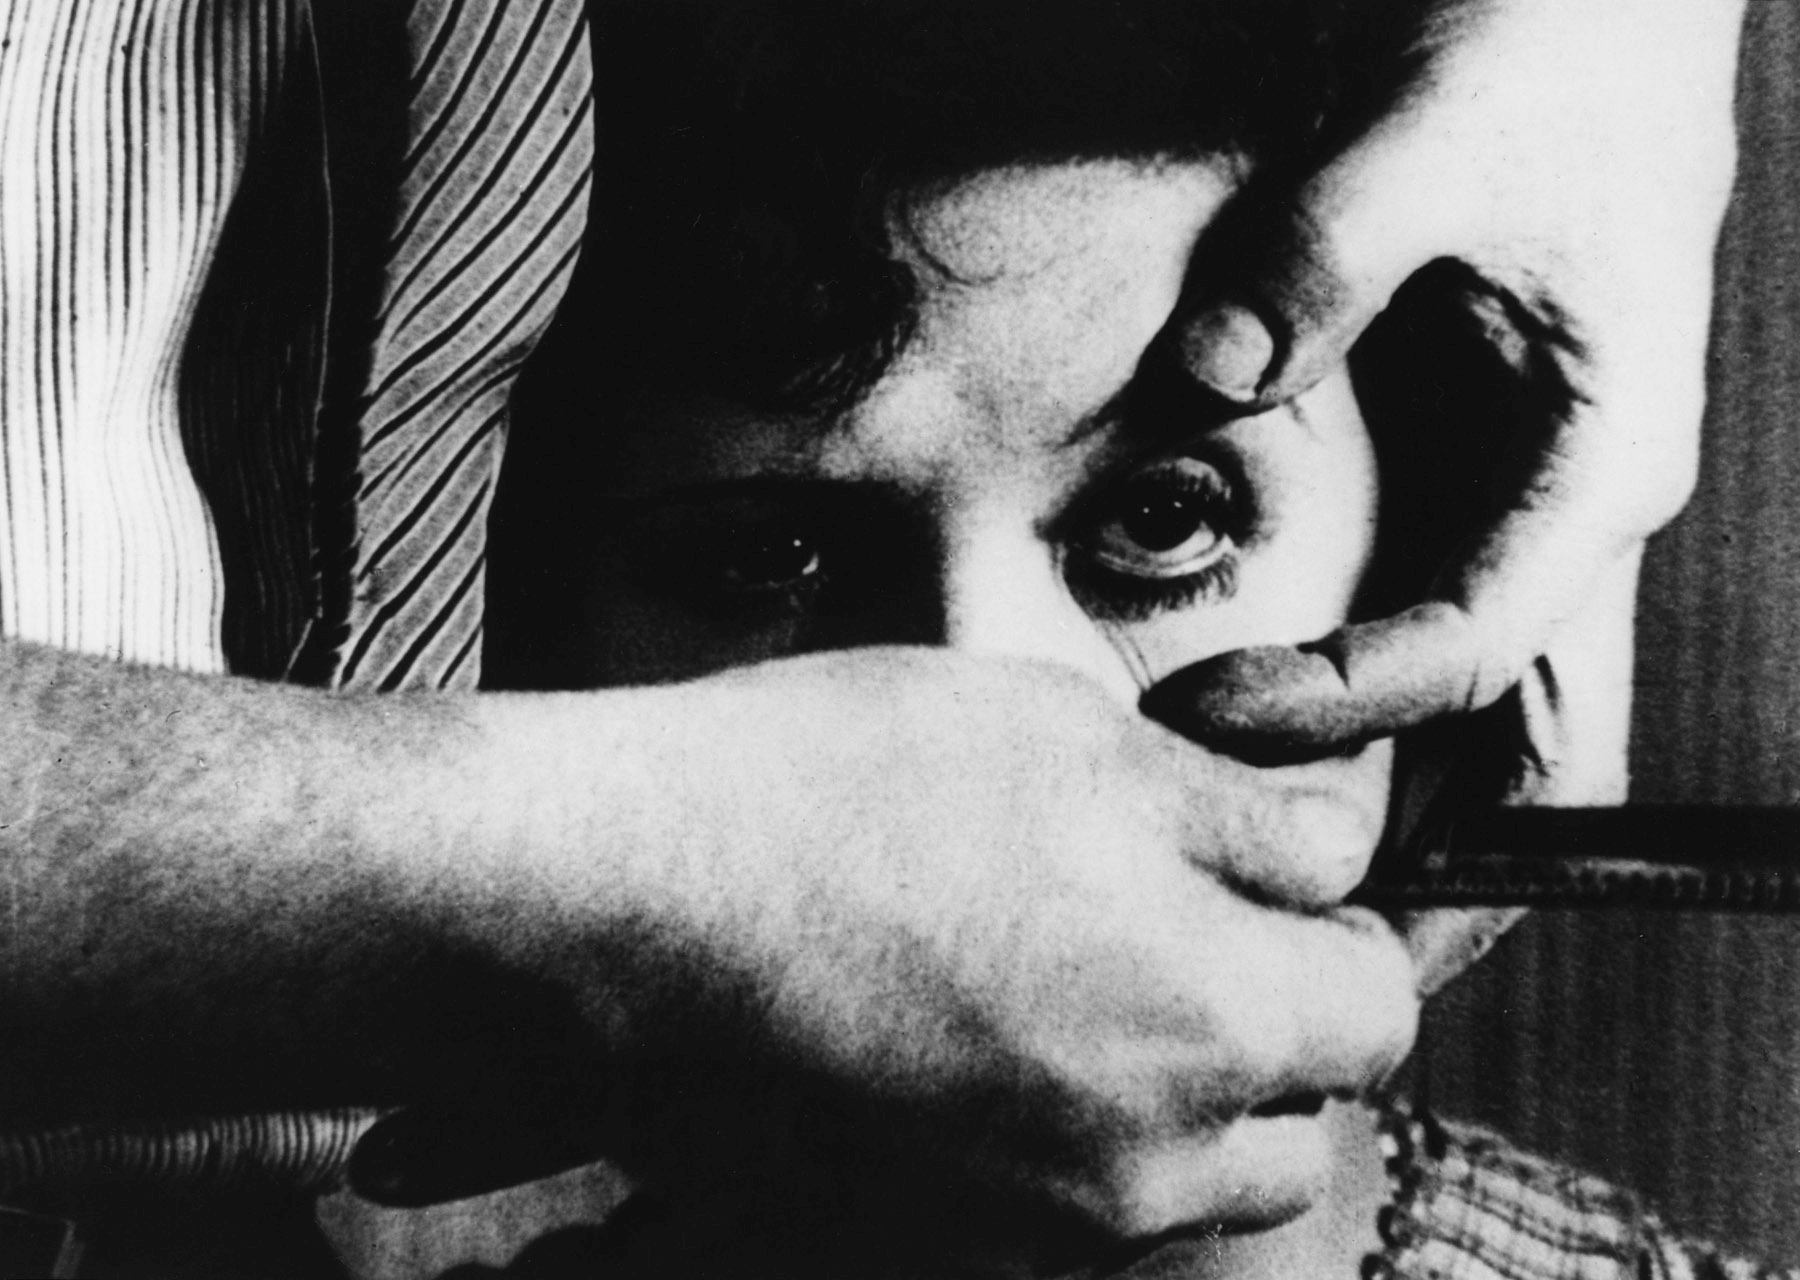 The History of Film Timeline History of Motion Pictures Still From Un Chien Andalou by Luis Bunuel Dali